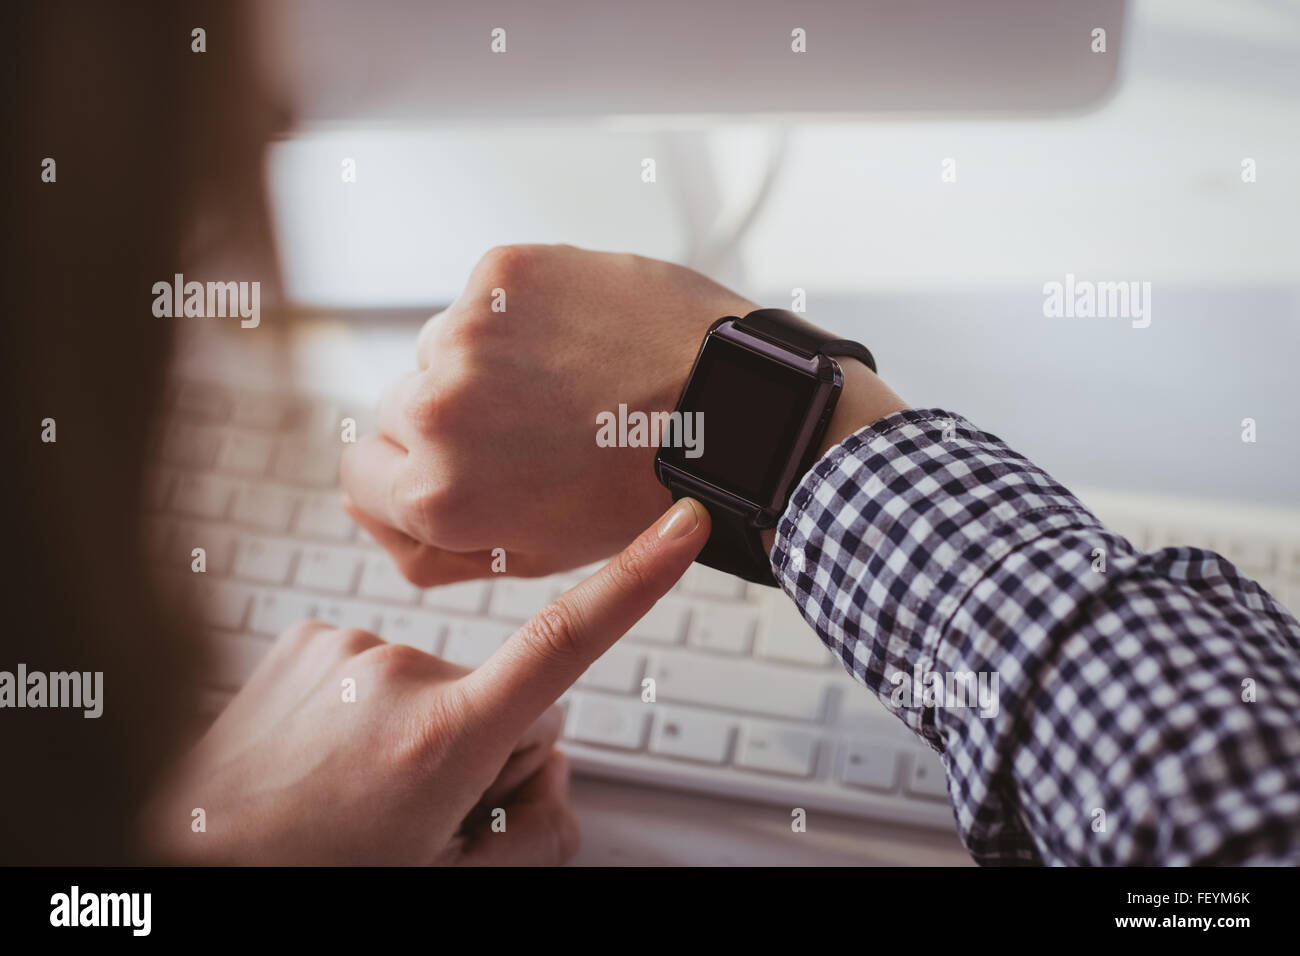 Over the shoulder view of businesswoman using her smart watch Stock Photo